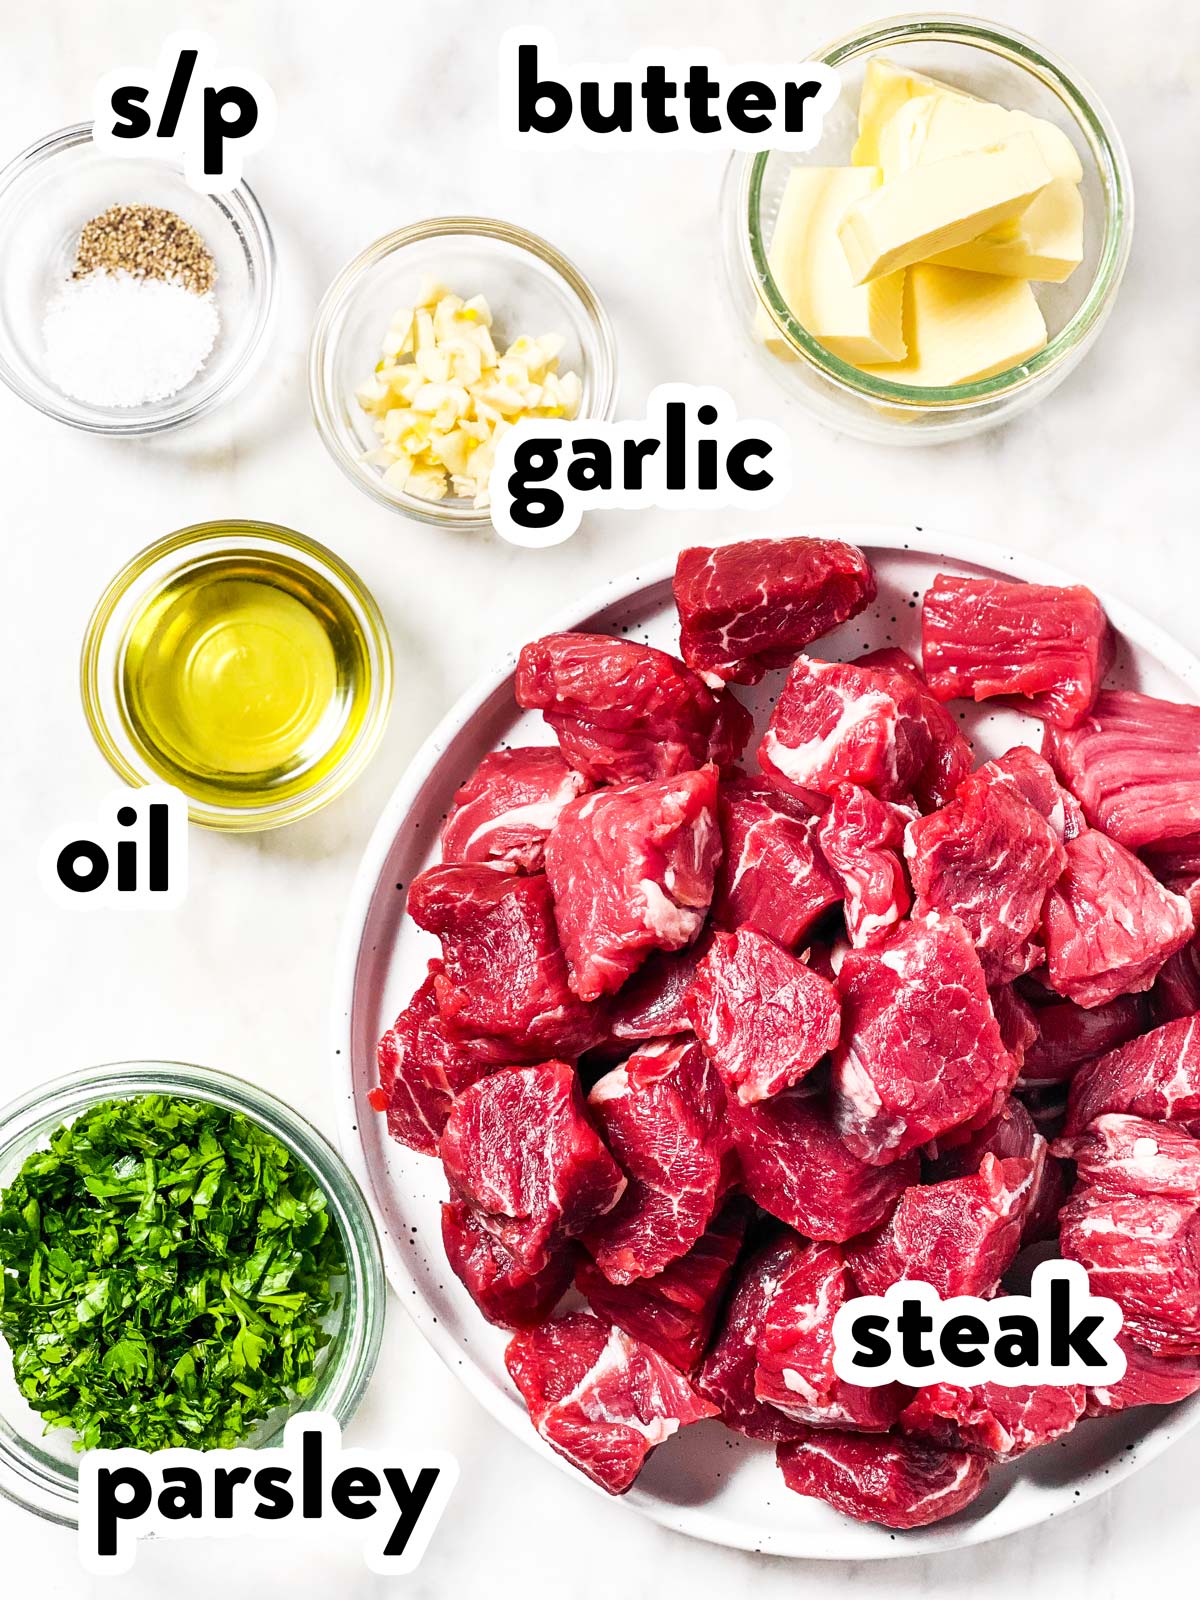 ingredients for steak bites with text labels